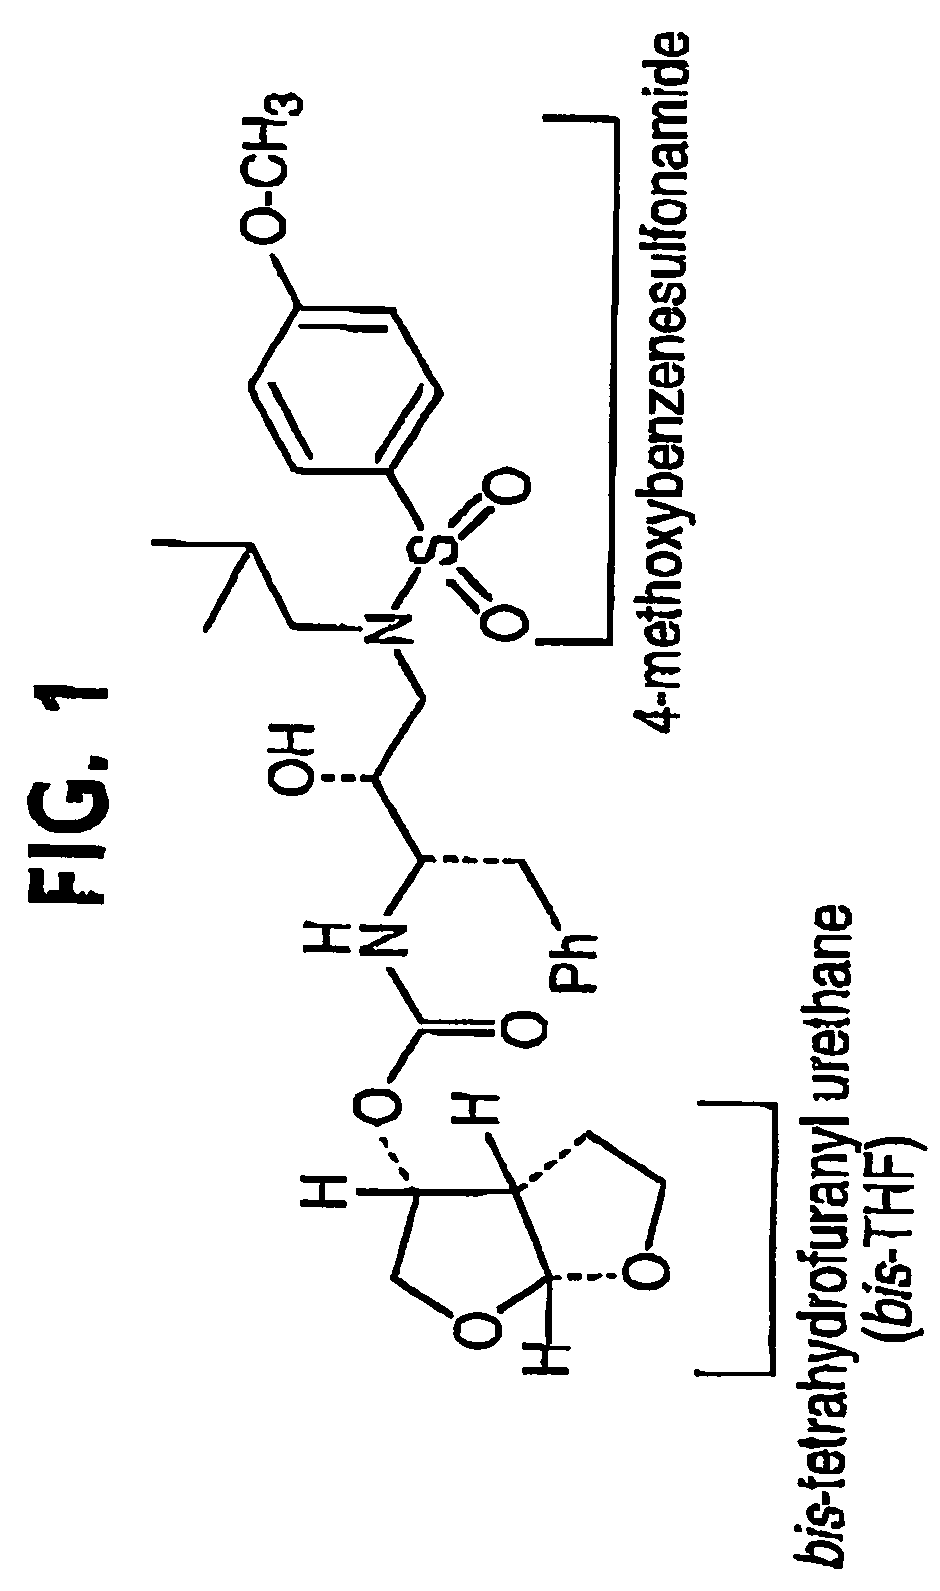 Resistance-repellent retroviral protease inhibitors